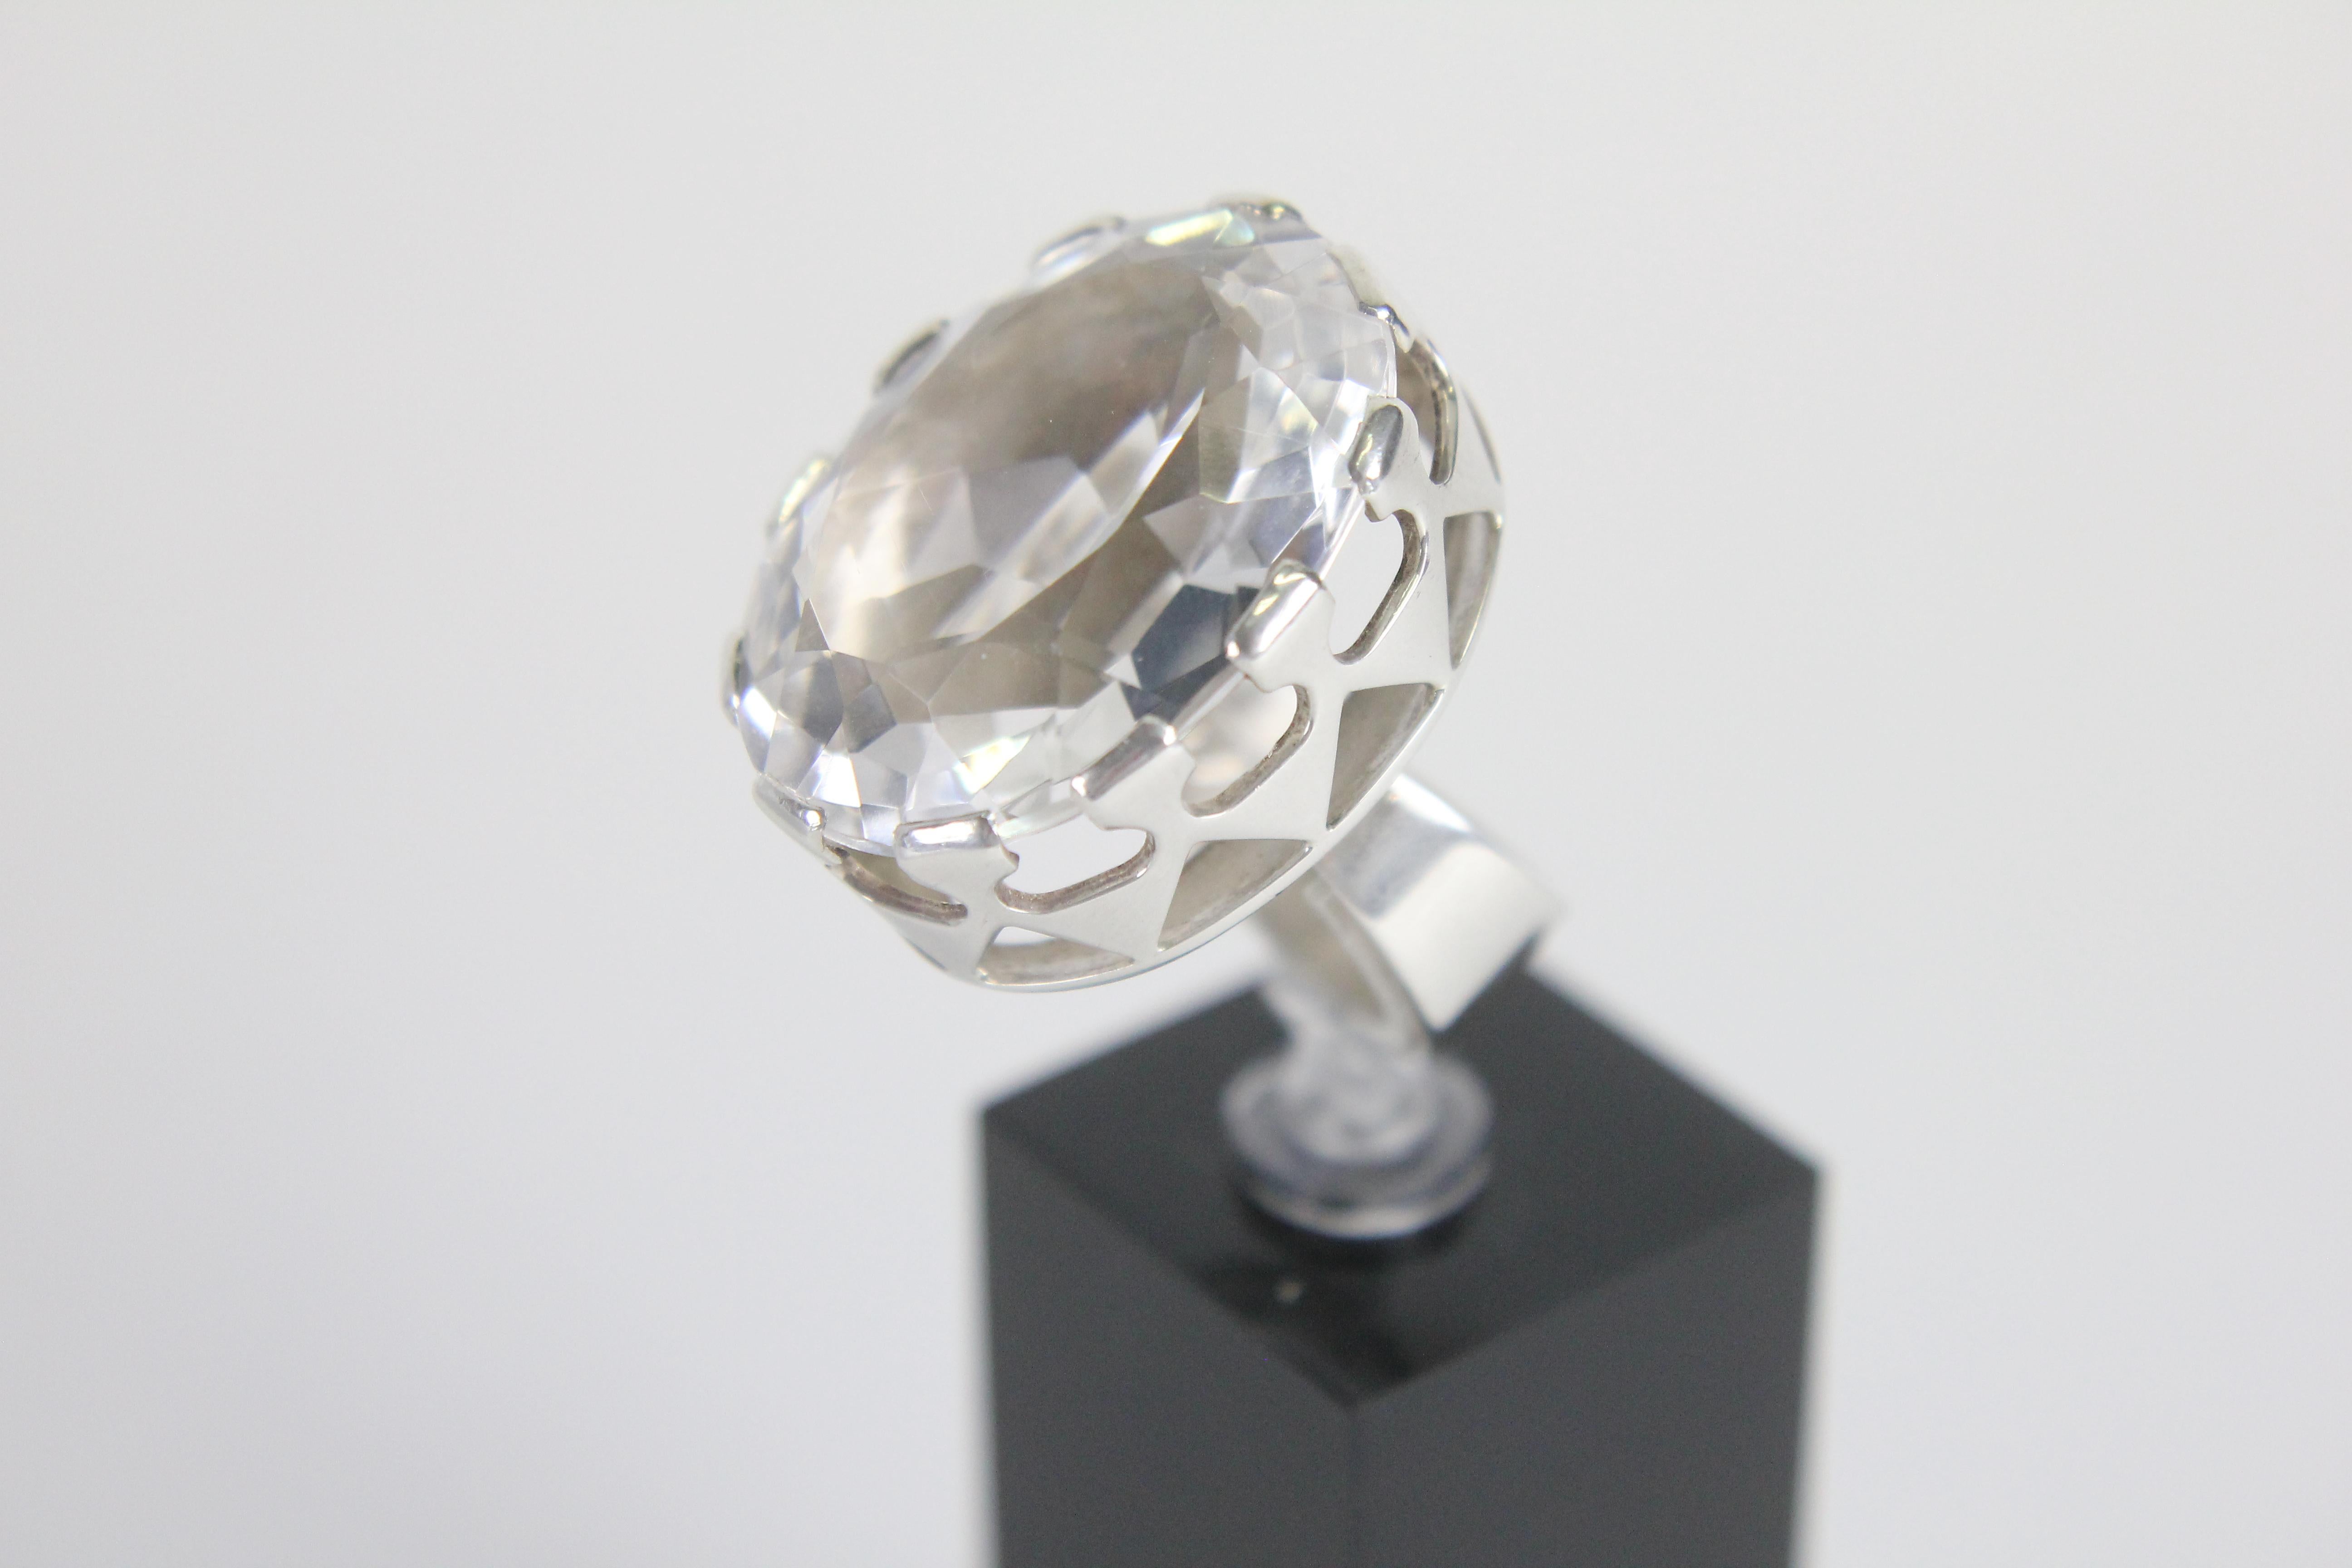 Modernist Ring in Silver and a Large Rock Crystal by Kaplan, Stockholm, 1968 For Sale 9